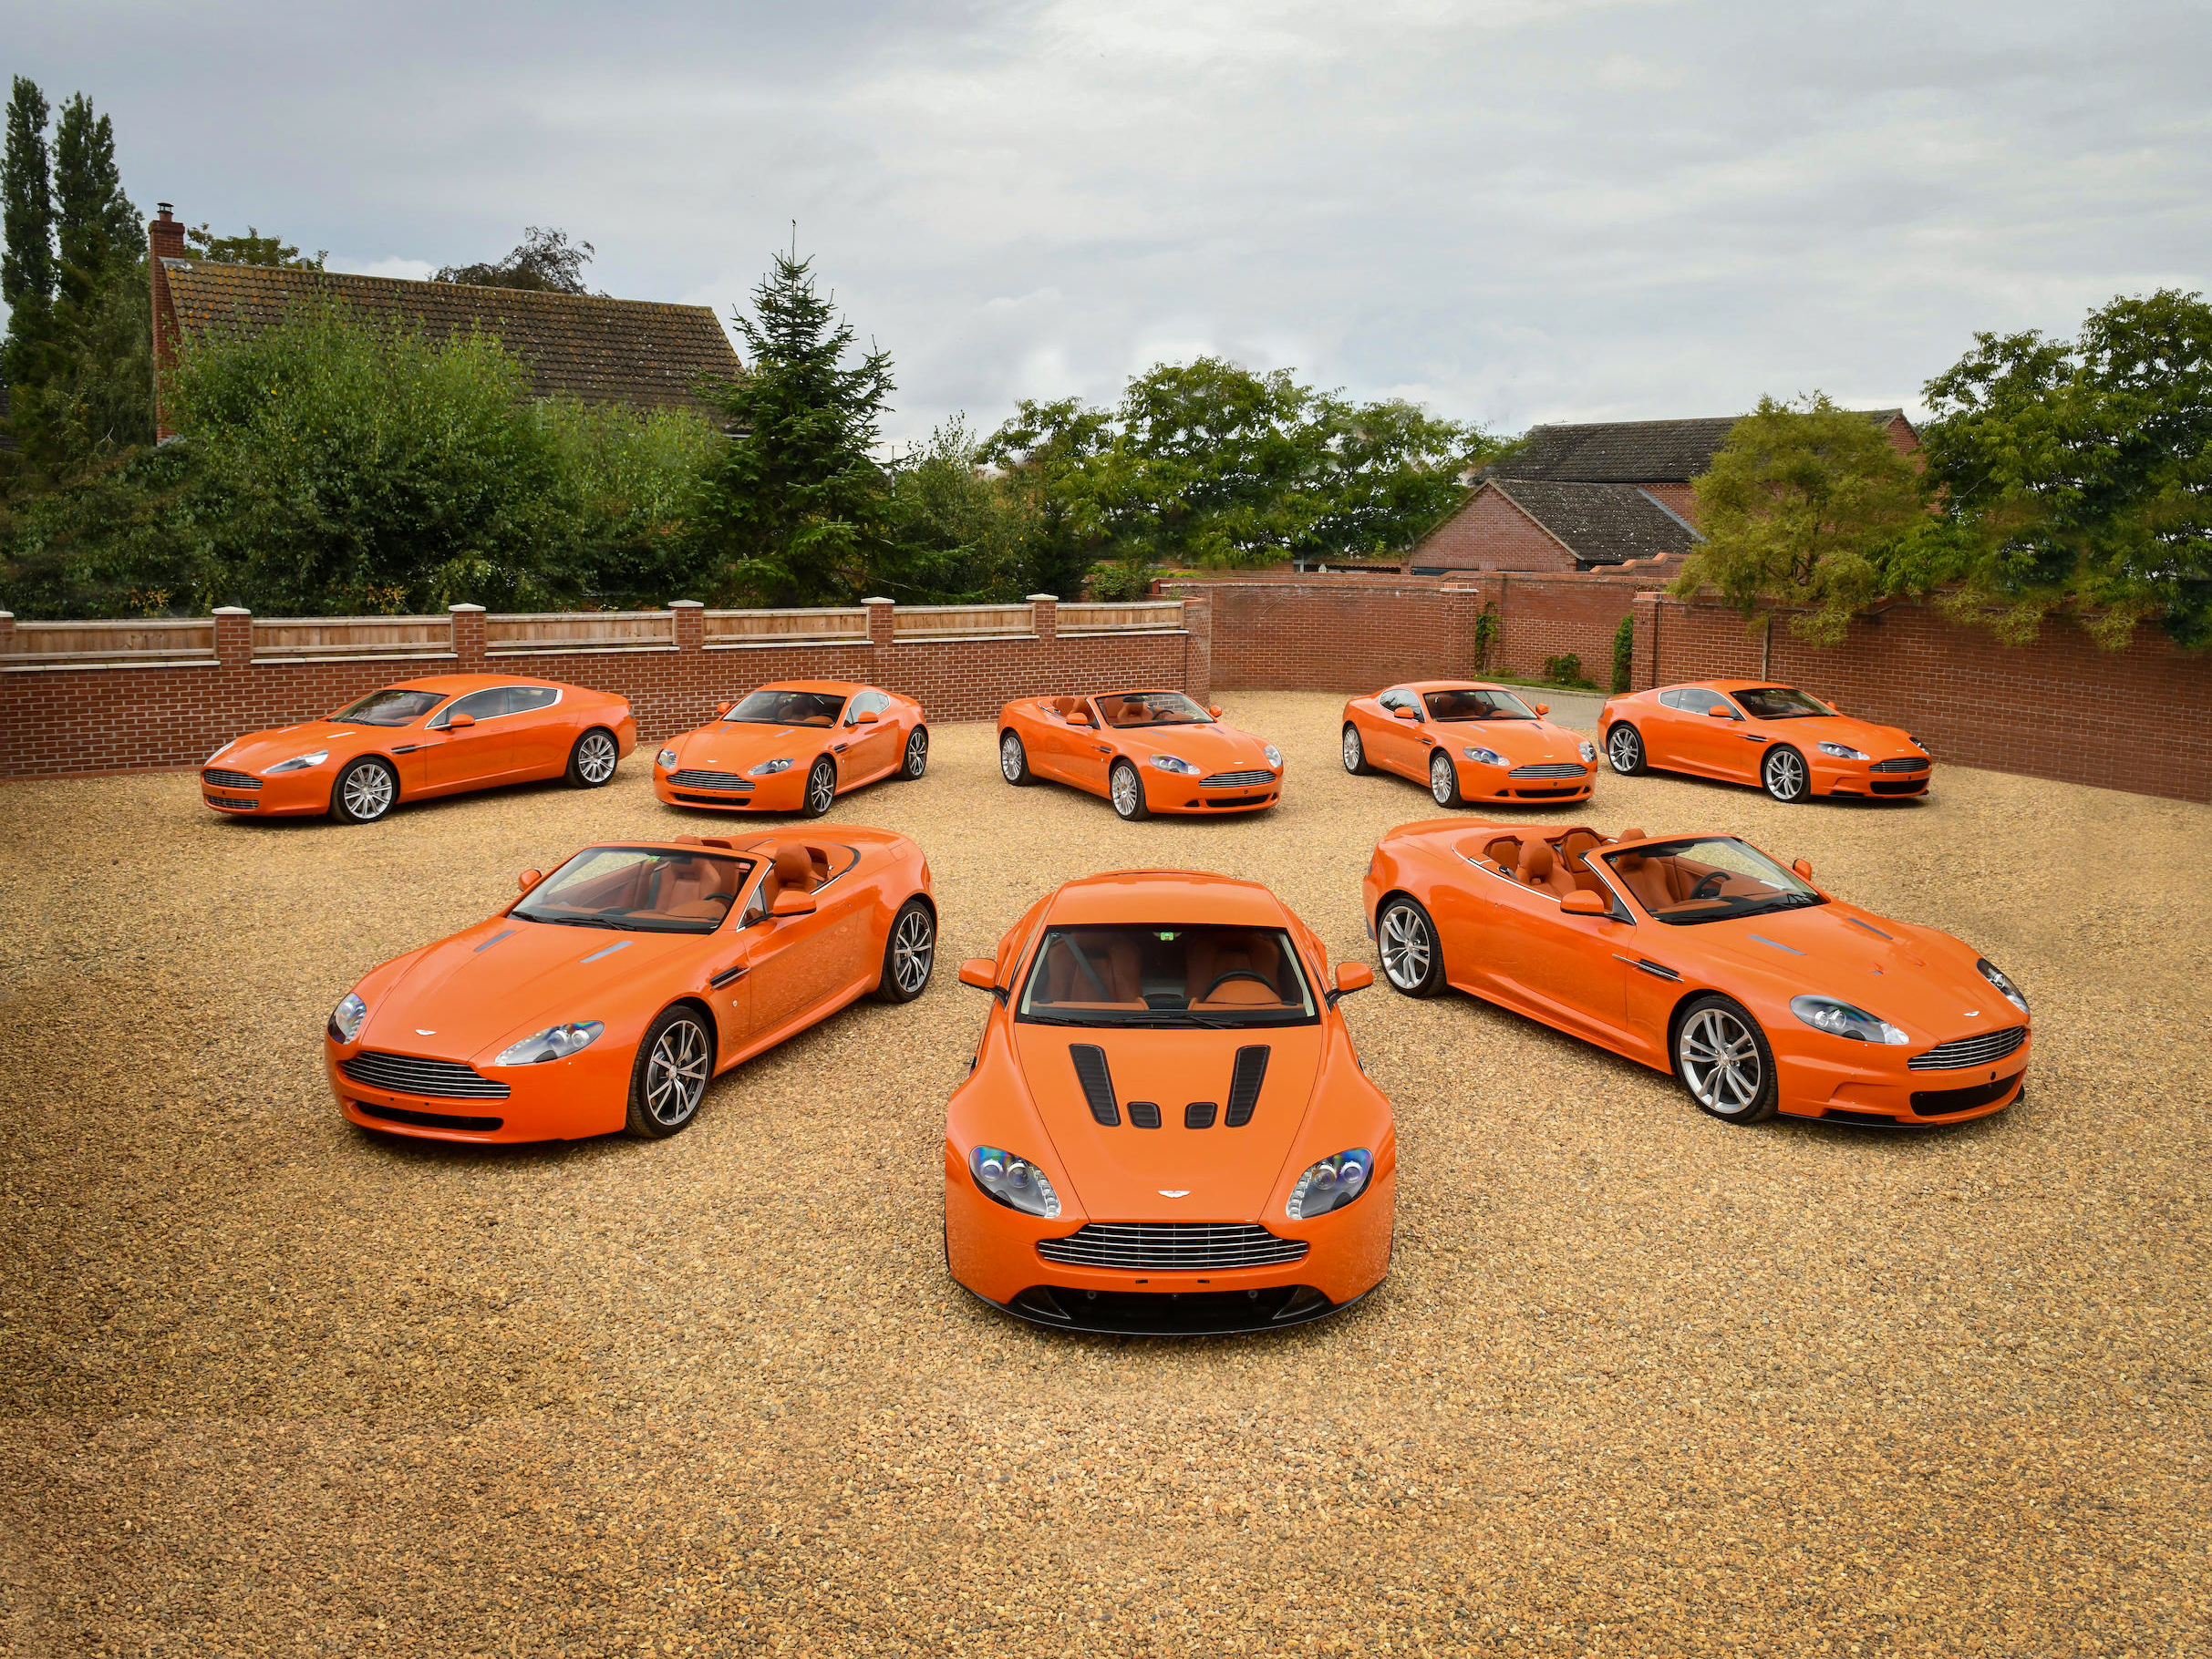 Can’t settle for one orange Aston Martin? Try eight